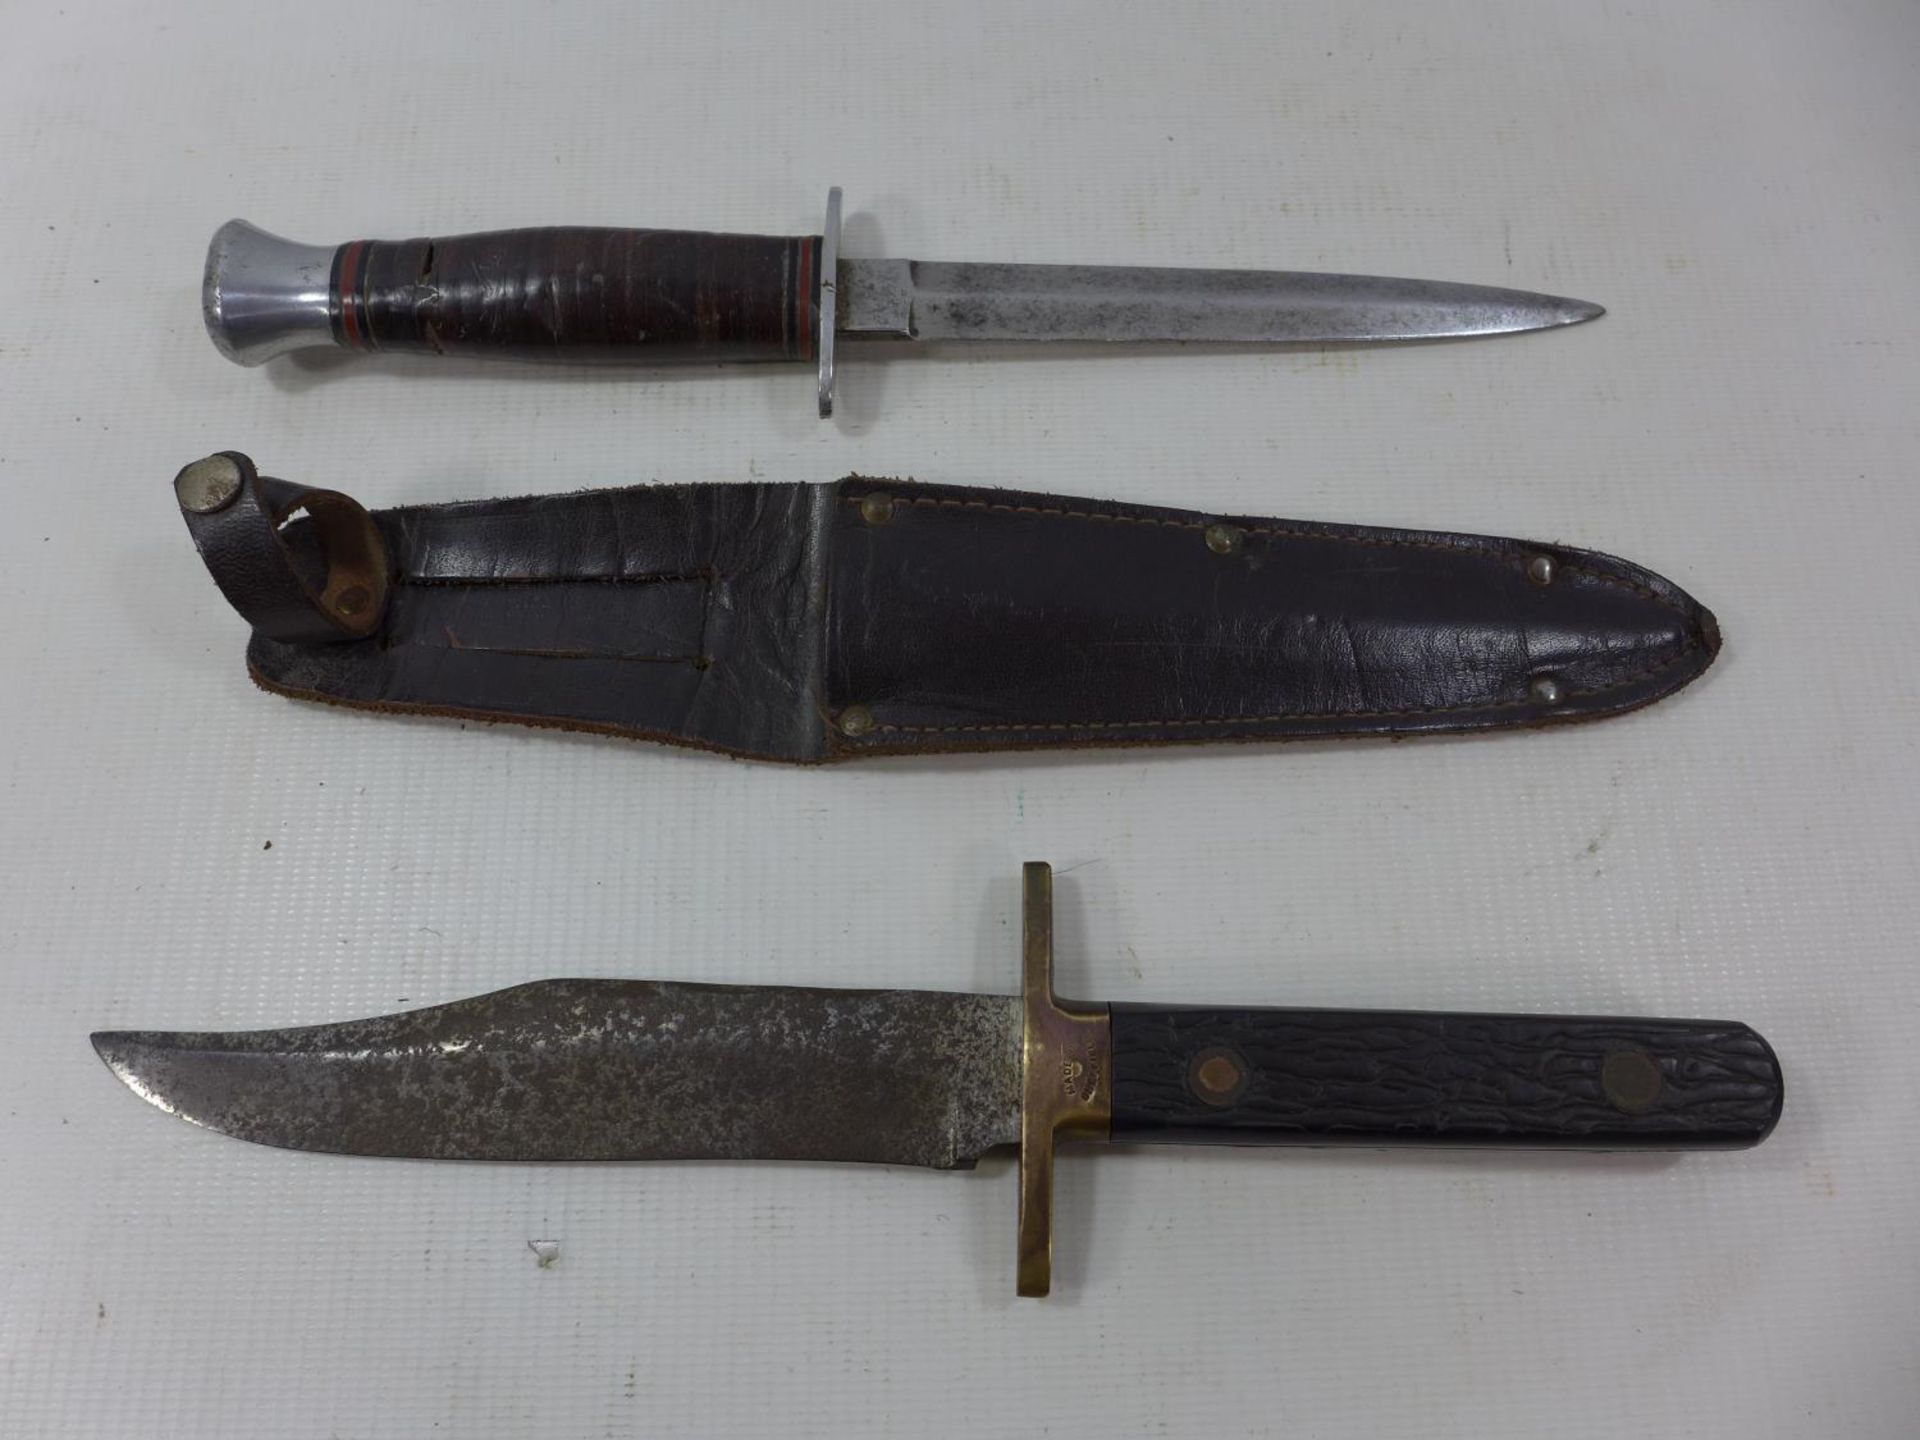 A SHEFFIELD MADE IXL BOWIE KNIFE, 15CM BLADE AND ANOTHER KNIFE, 15CM BLADE, LEATHER SCABBARD